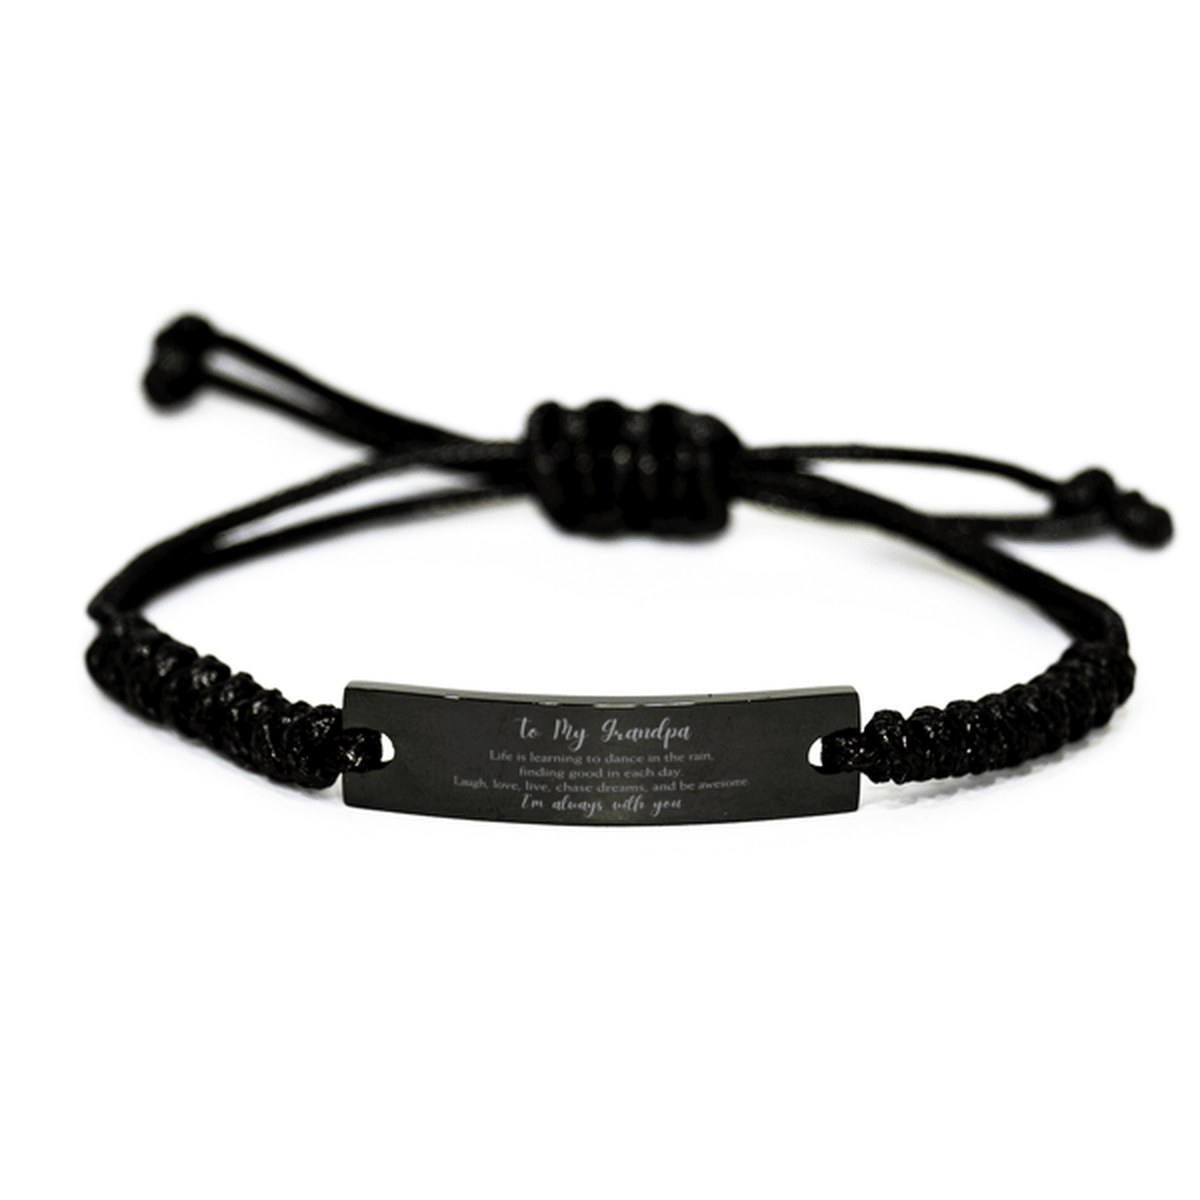 Grandpa Christmas Perfect Gifts, Grandpa Black Rope Bracelet, Motivational Grandpa Engraved Gifts, Birthday Gifts For Grandpa, To My Grandpa Life is learning to dance in the rain, finding good in each day. I'm always with you